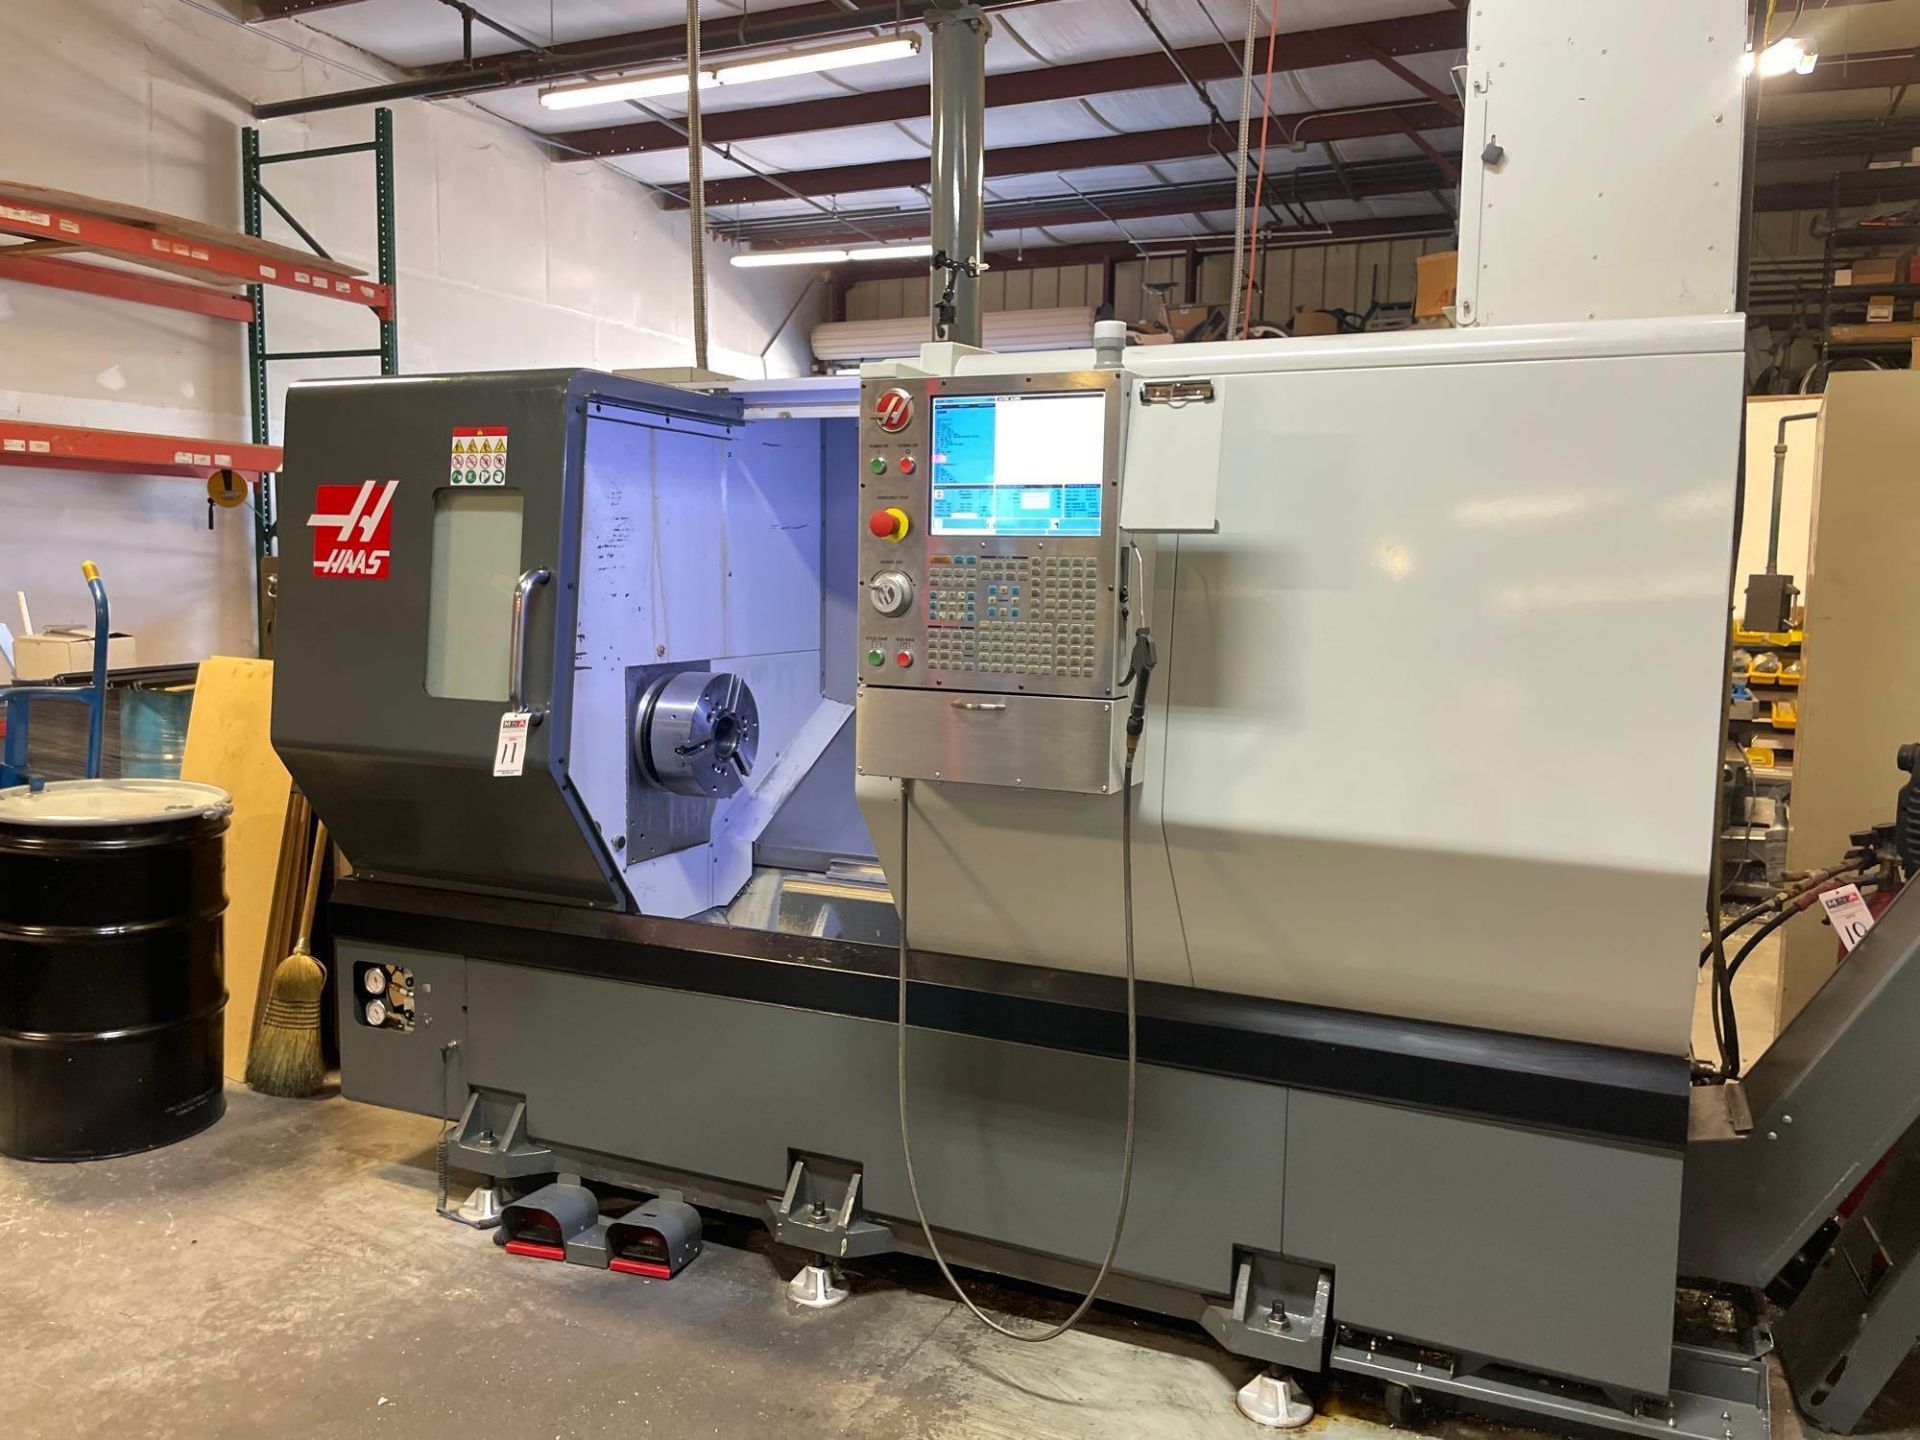 Haas ST-30 3-Axis CNC Lathe, C-Axis, 12" Hydraulic Chuck, 12 Position Turret, High Torque, New 2017 - Image 4 of 12